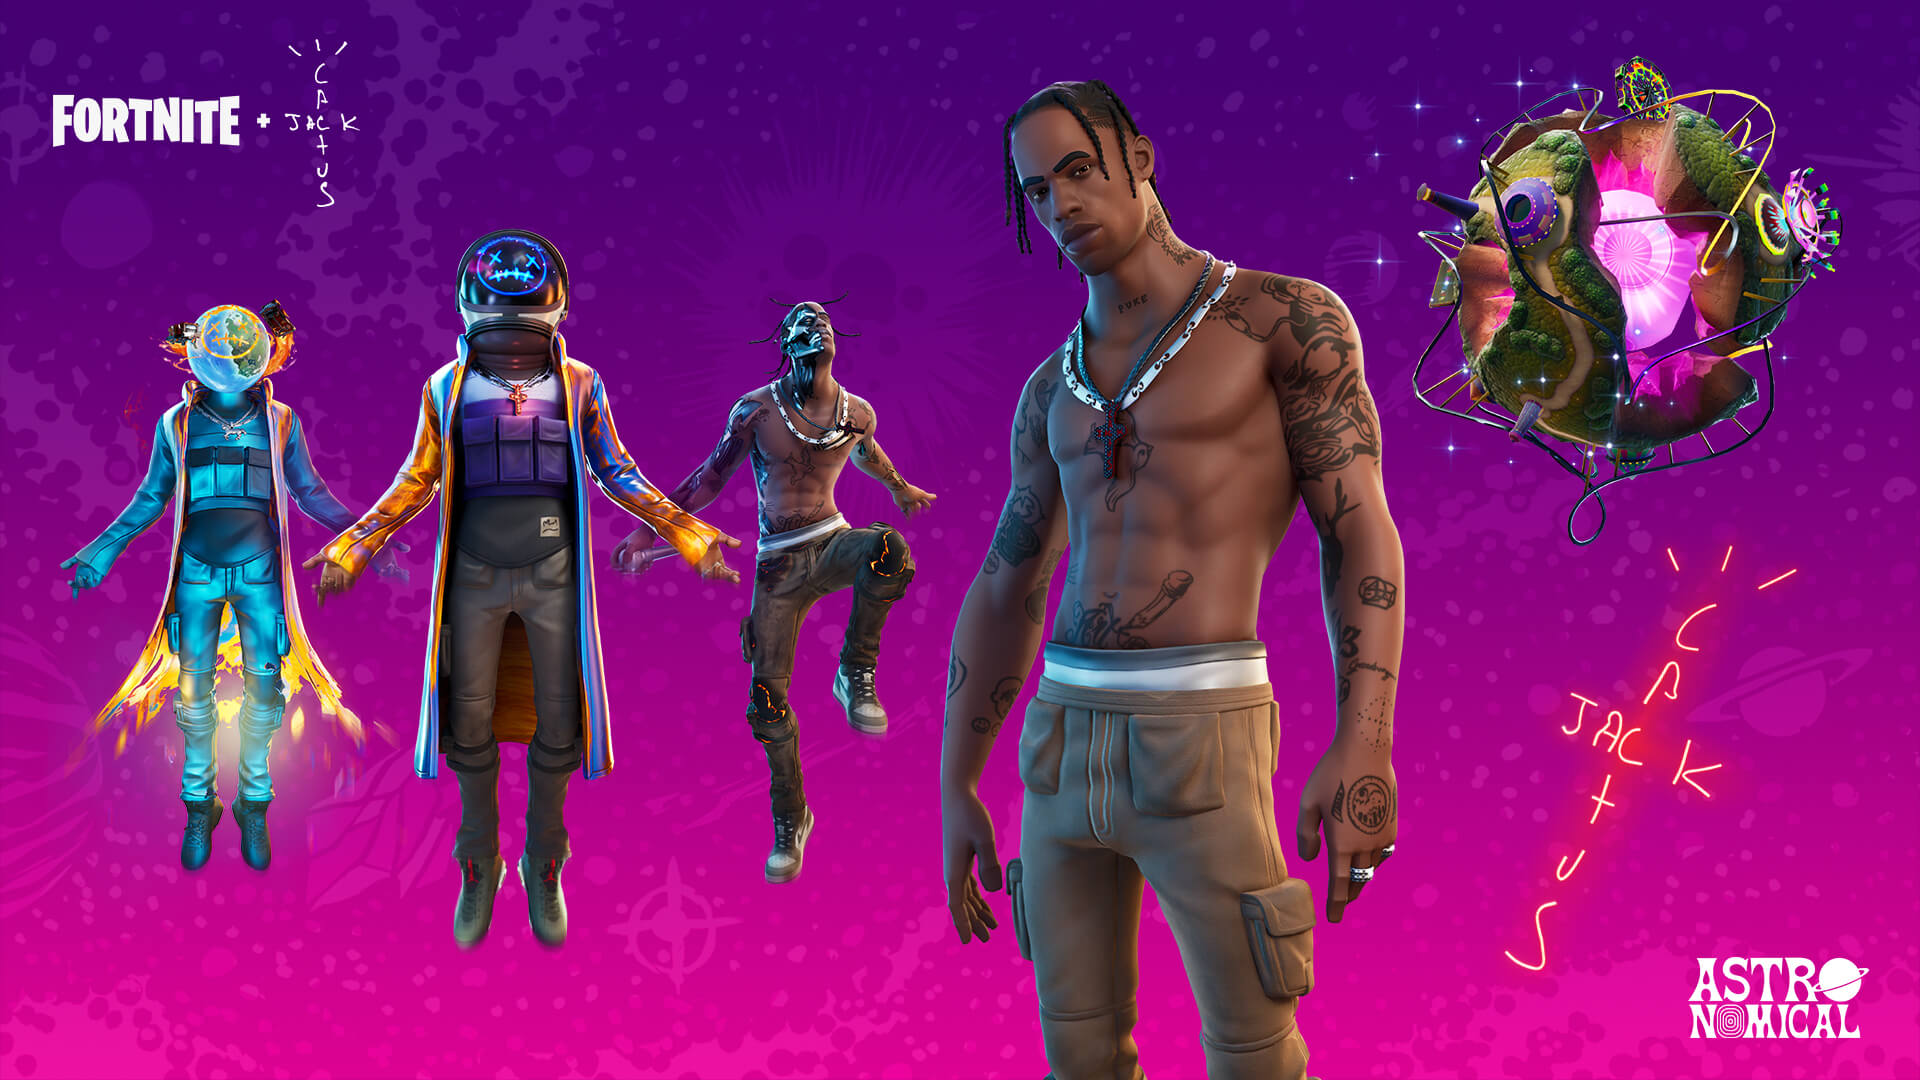 Fortnite hosted a psychedelic Travis Scott concert and 12.3M people watched  | TechCrunch